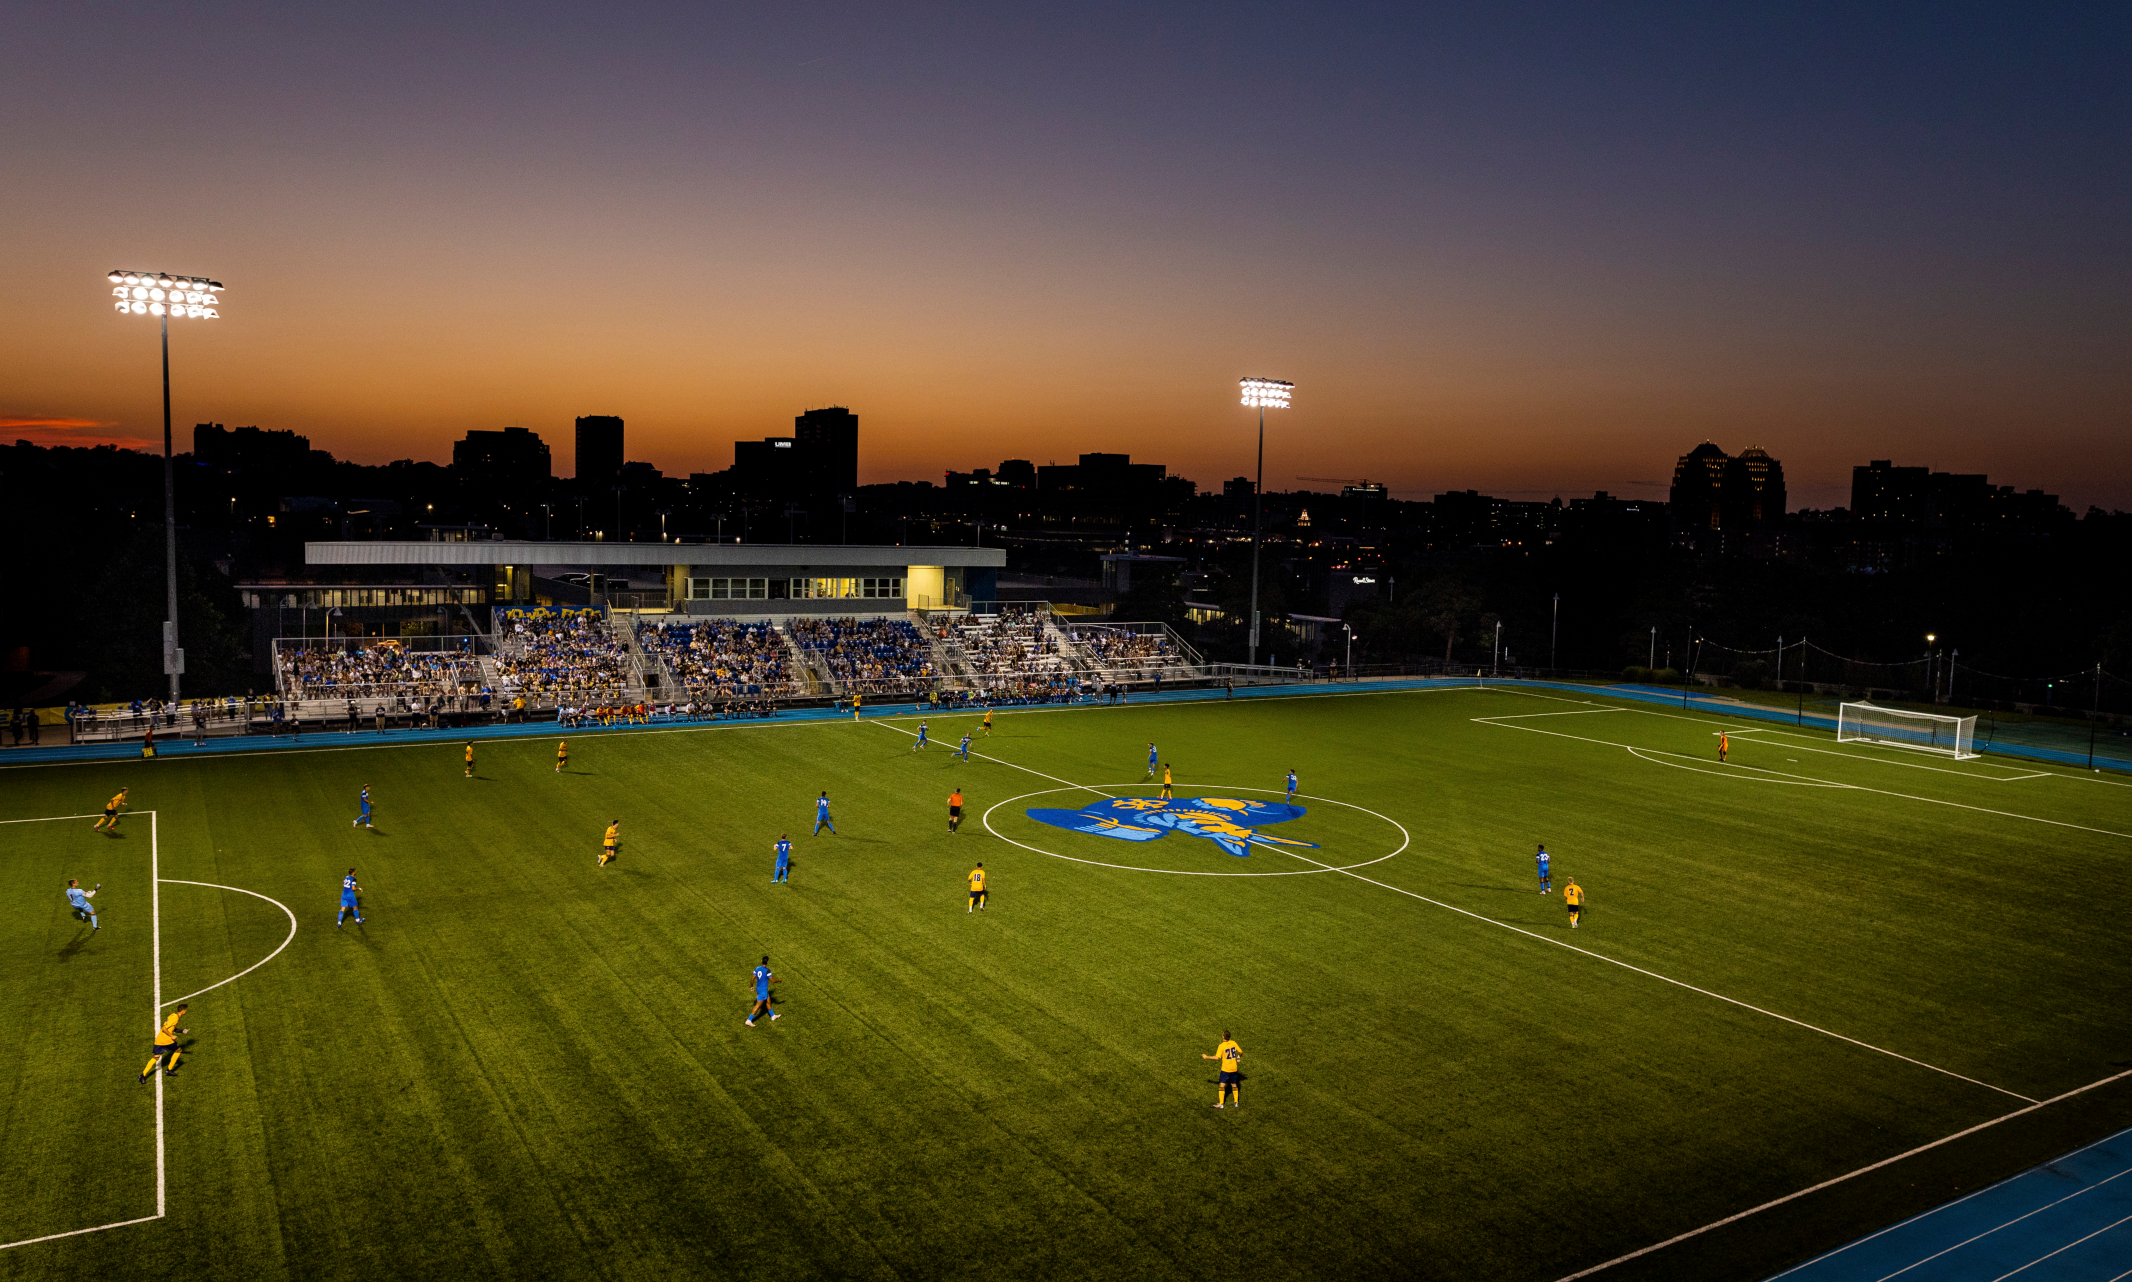 Soccer team plays at Durwood stadium at sunset with city skyline in silhouette